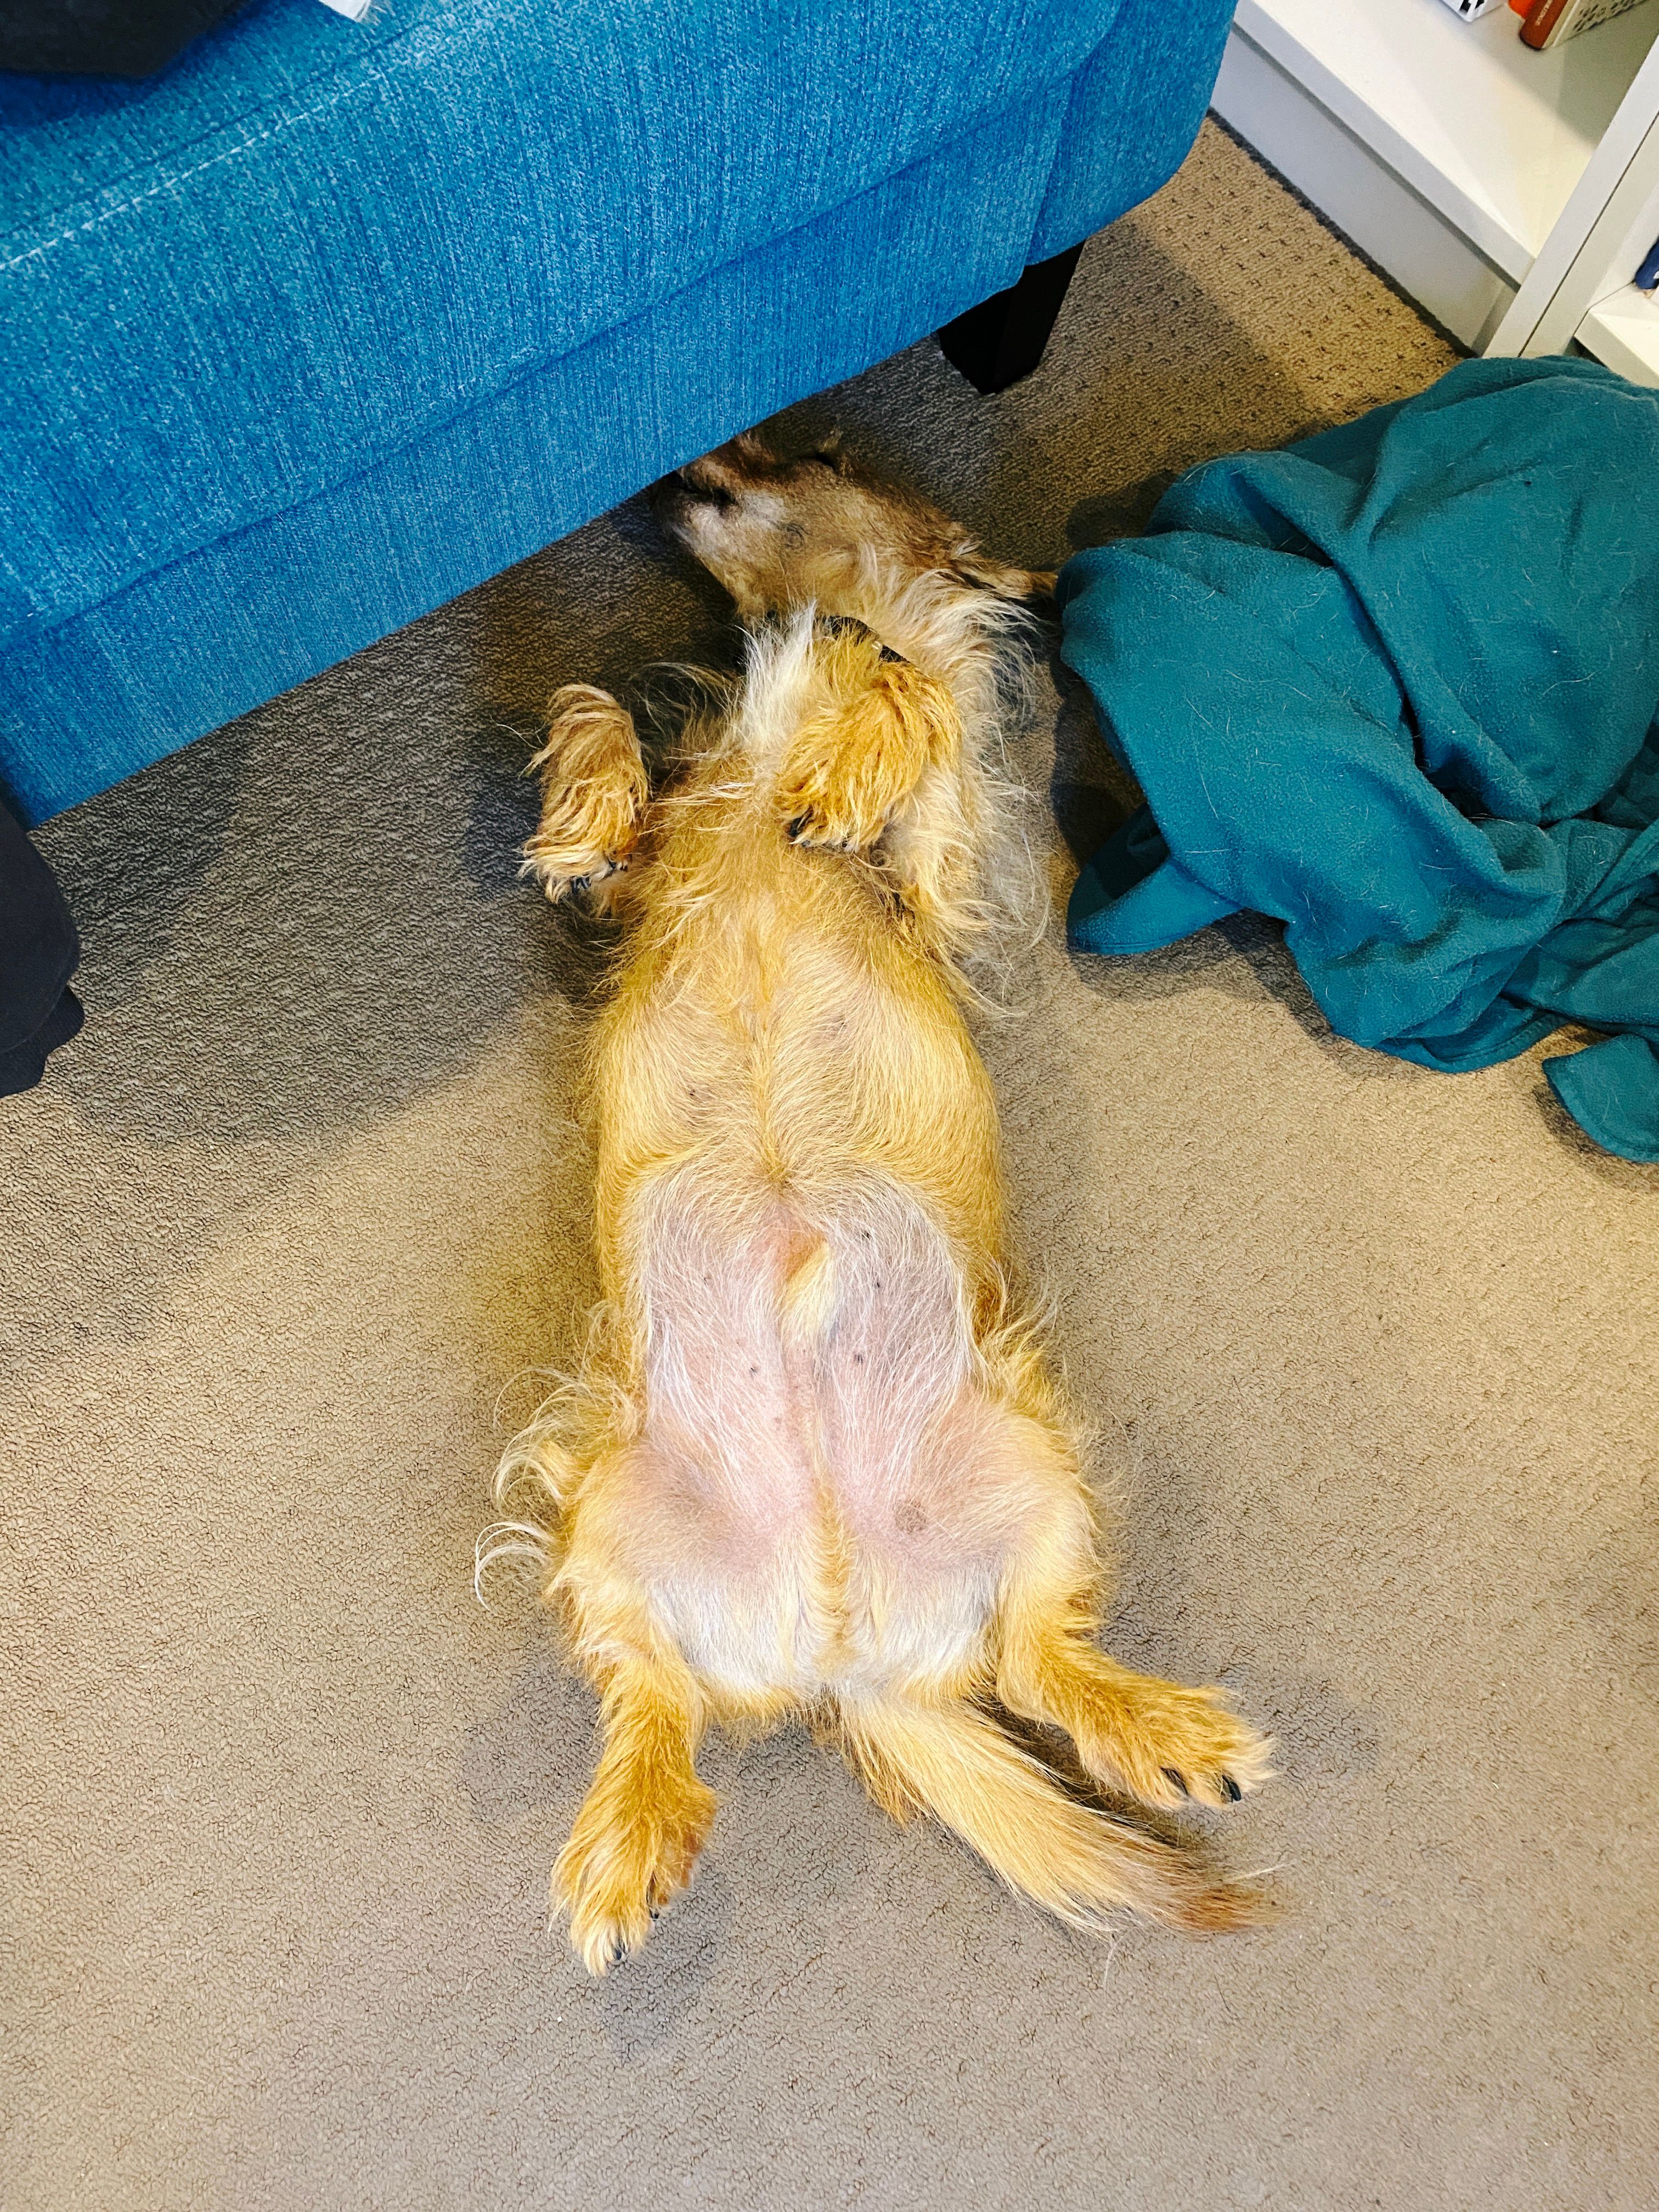 A photo of a small scruffy blonde dog lying completely upside-down with his legs in the air, asleep, and with half his face also underneath an armchair.